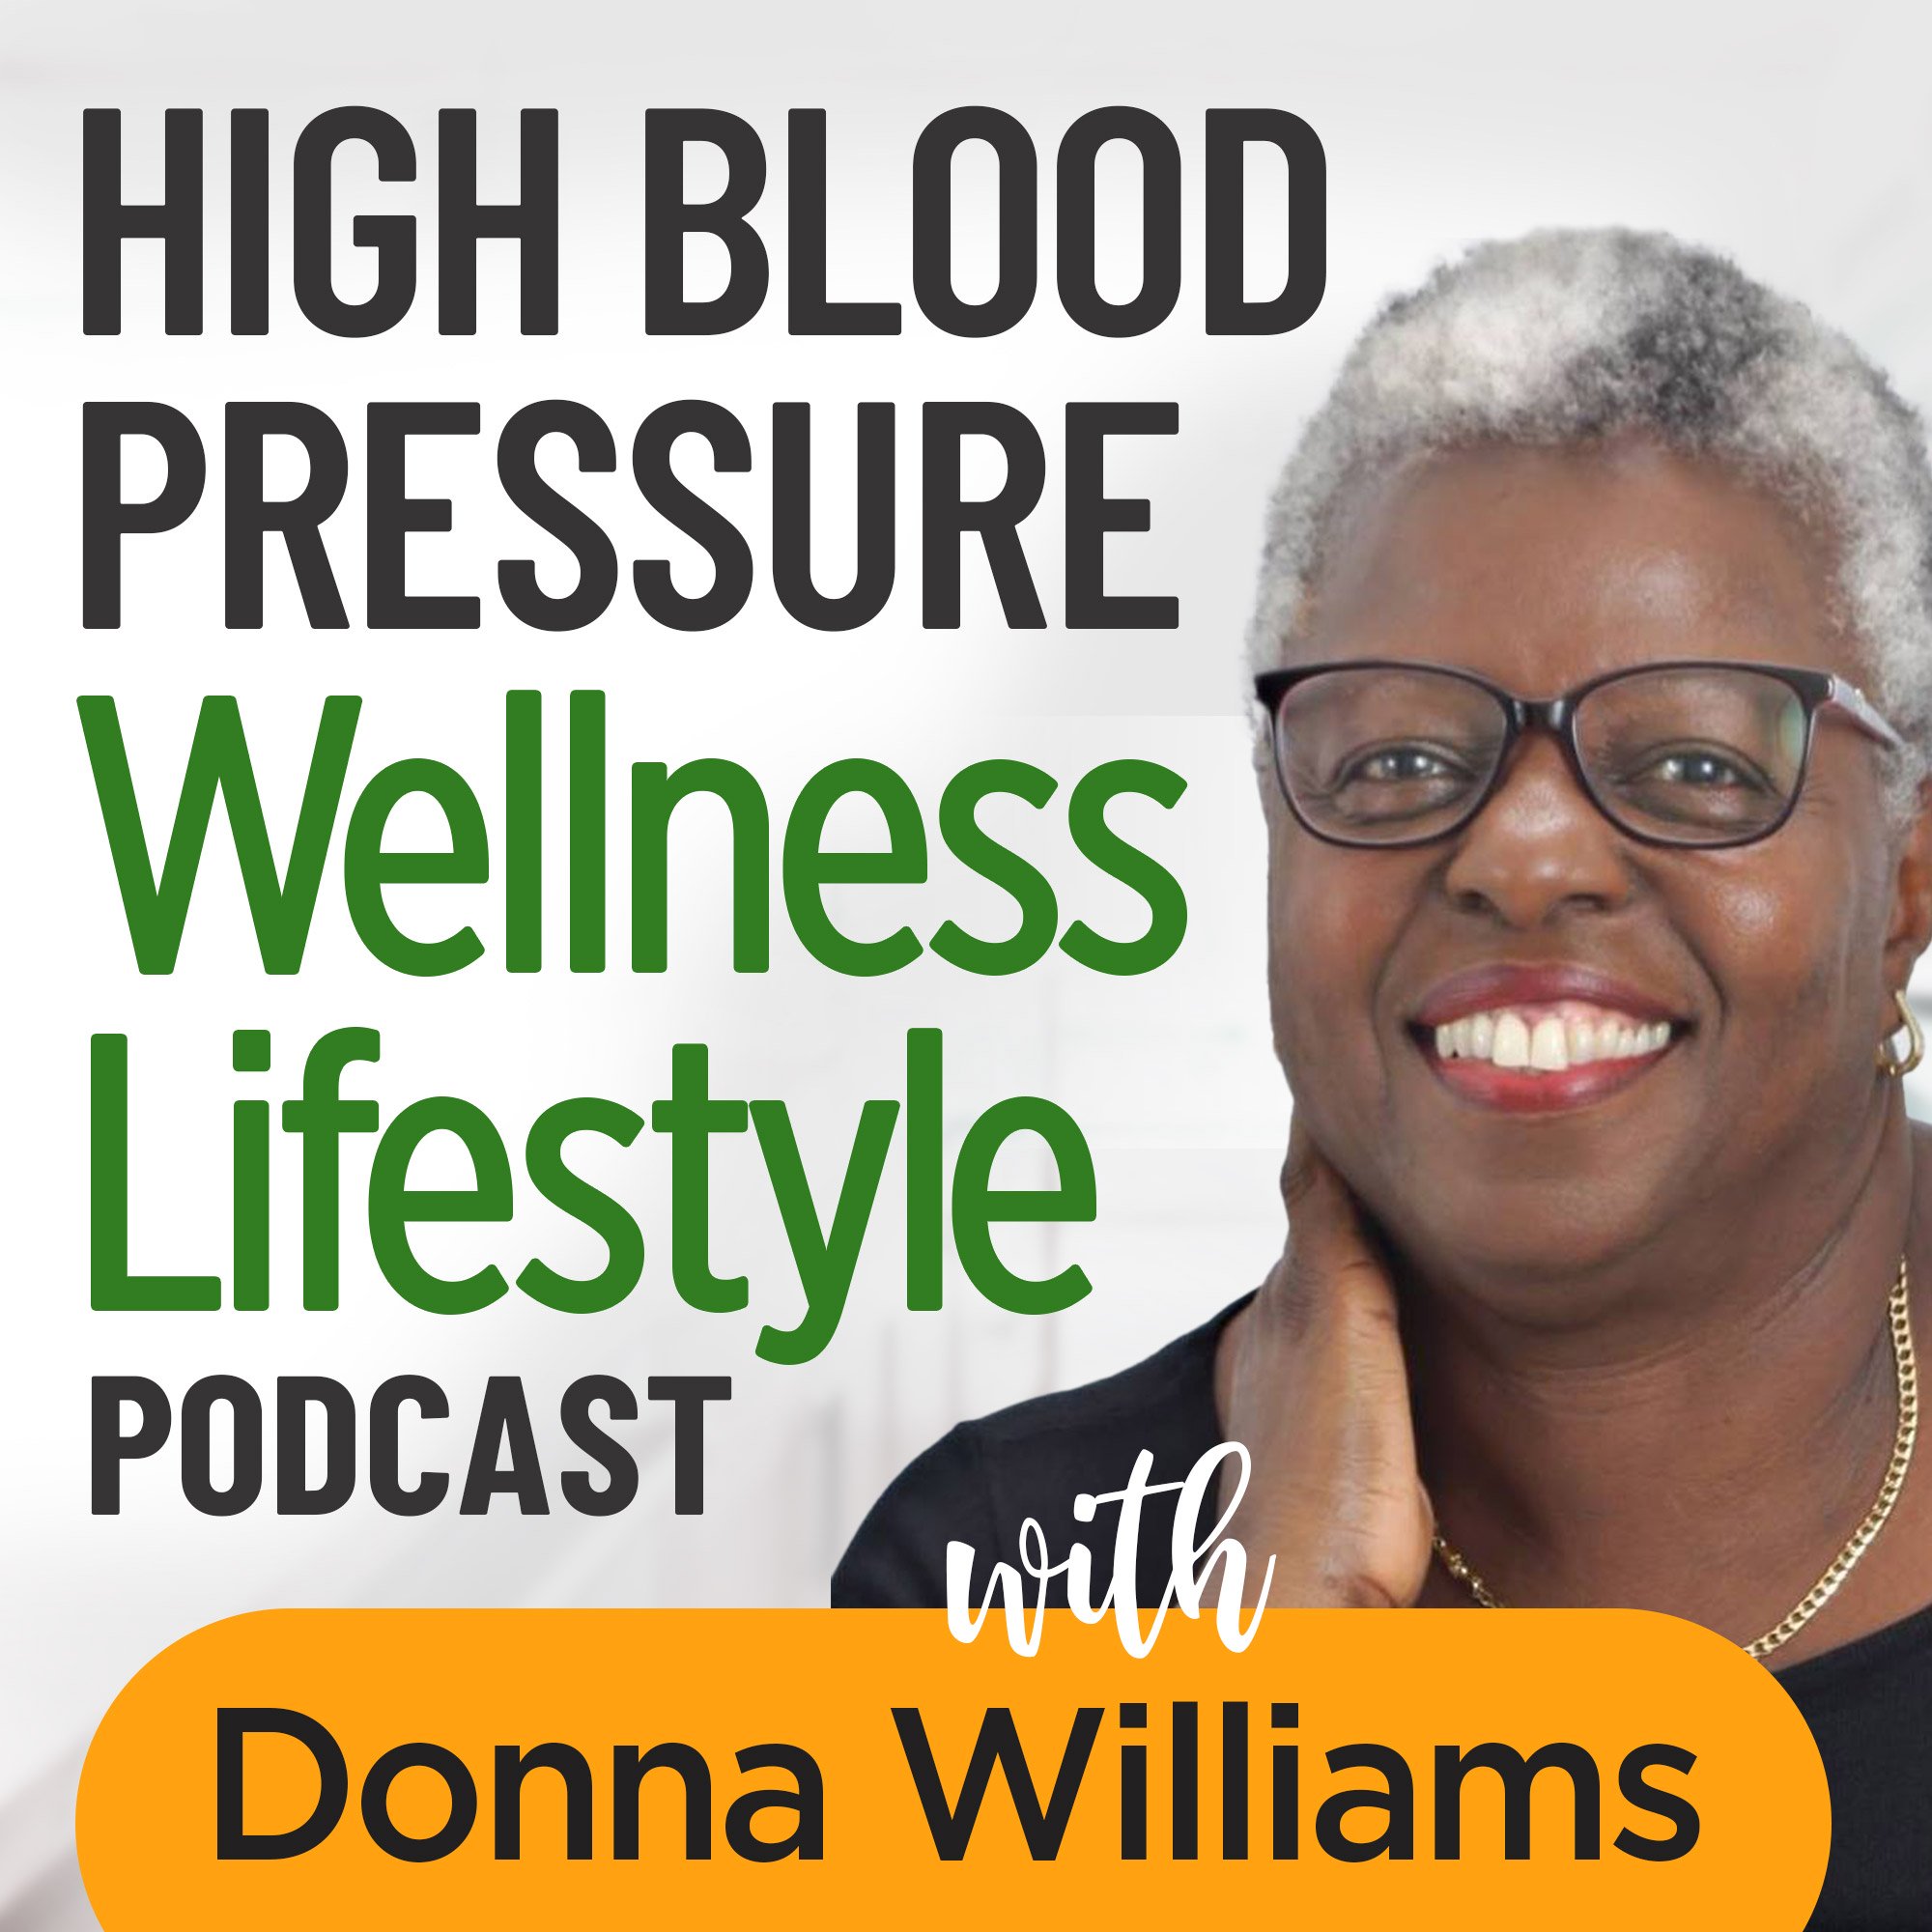 hbp podcast picture.  https://www.info-on-high-blood-pressure.com/supporting-the-lymphatic-system.html